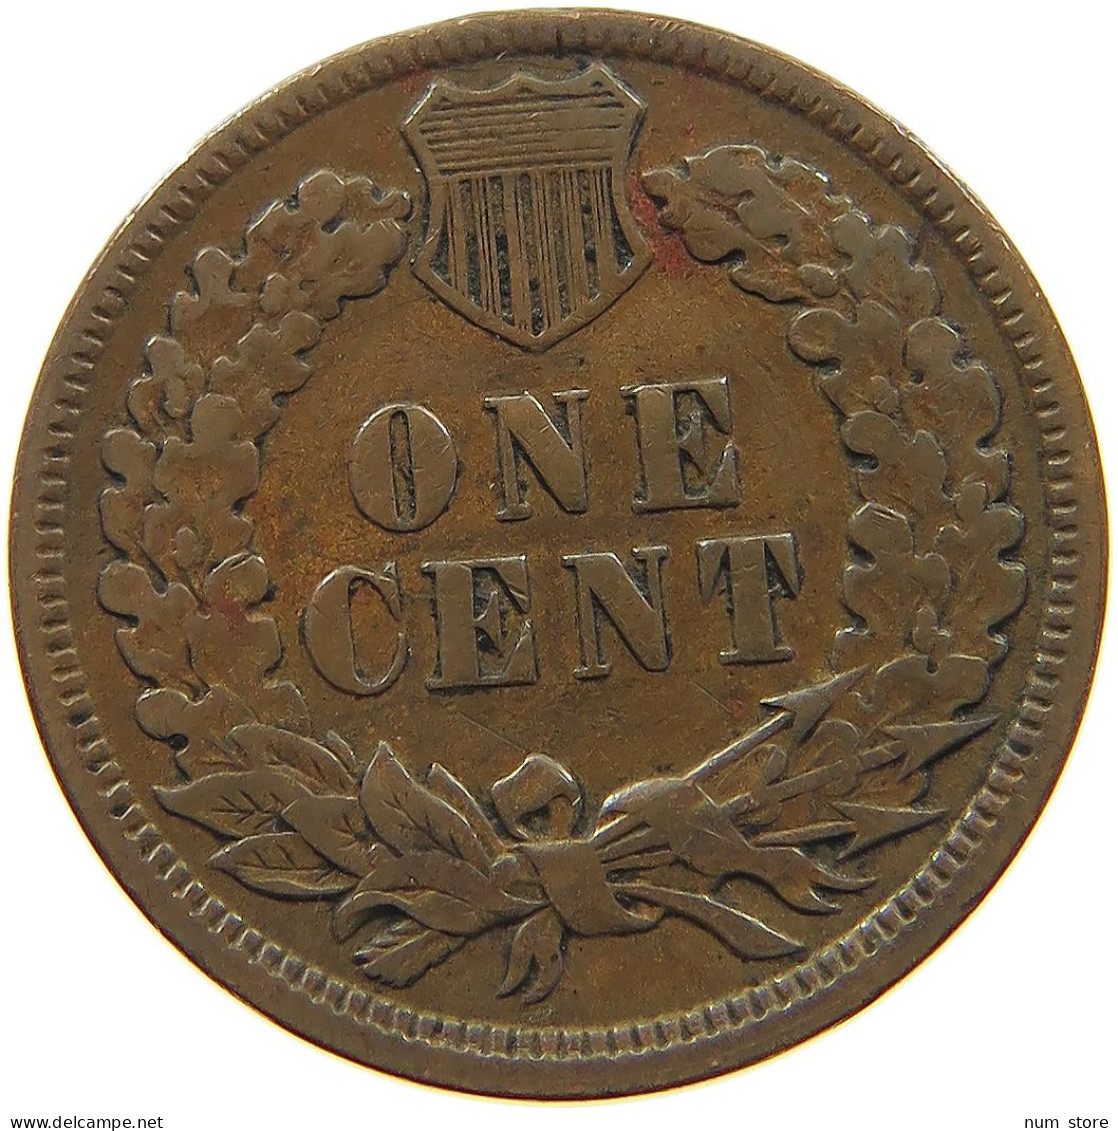 UNITED STATES OF AMERICA CENT 1892 INDIAN HEAD #a050 0467 - 1859-1909: Indian Head